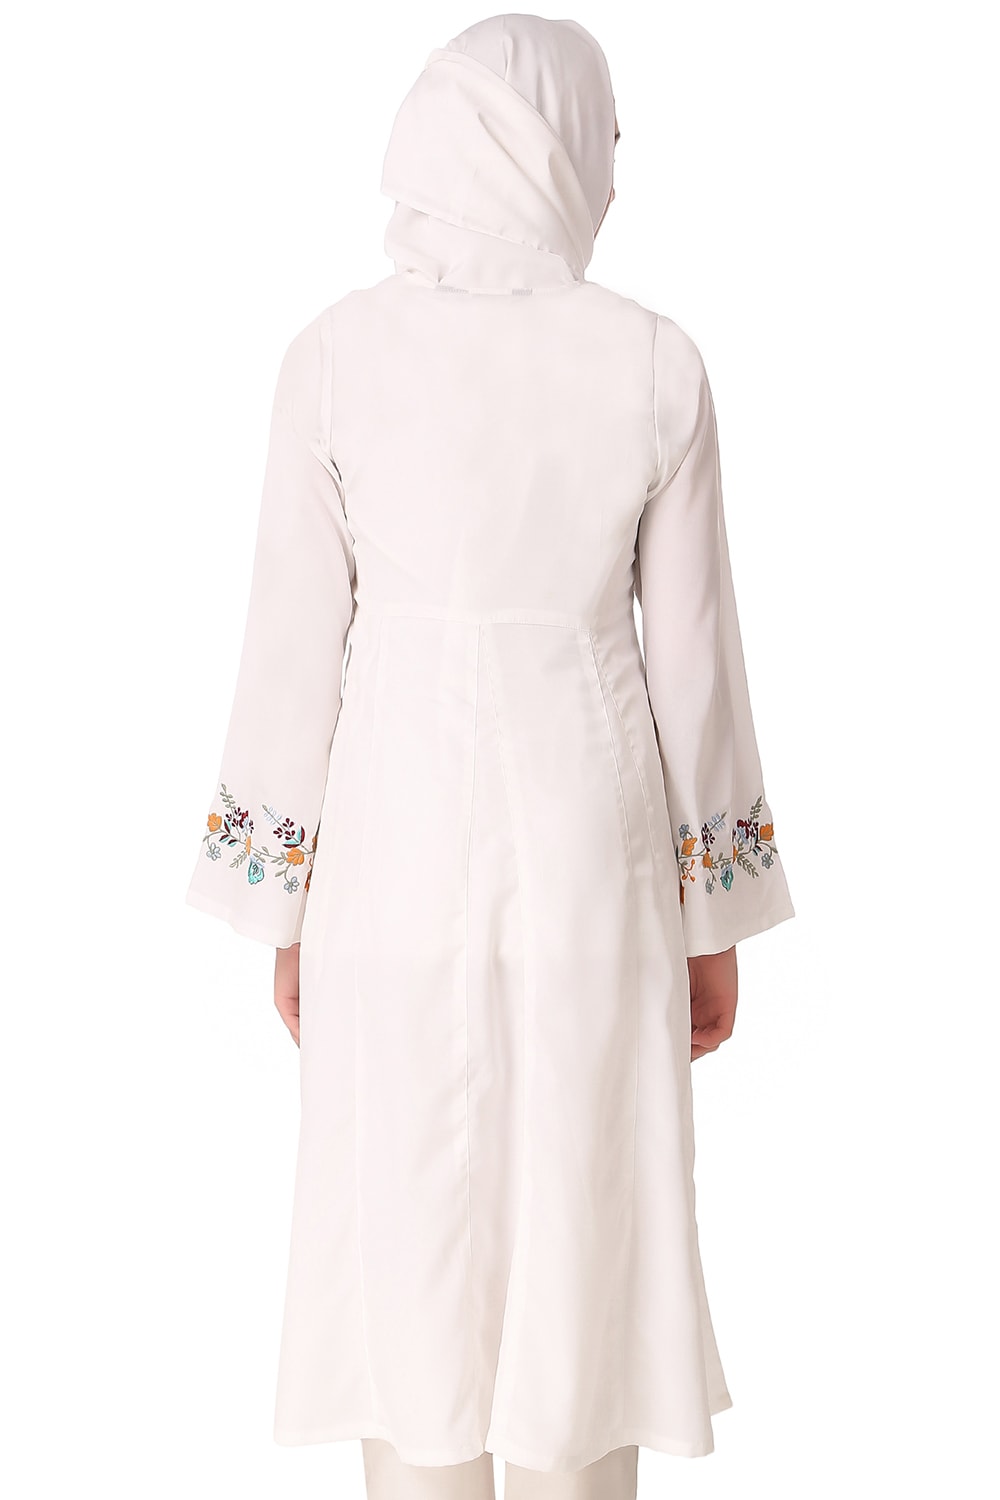 Colorful Embroidered Bell Sleeve White Tunic